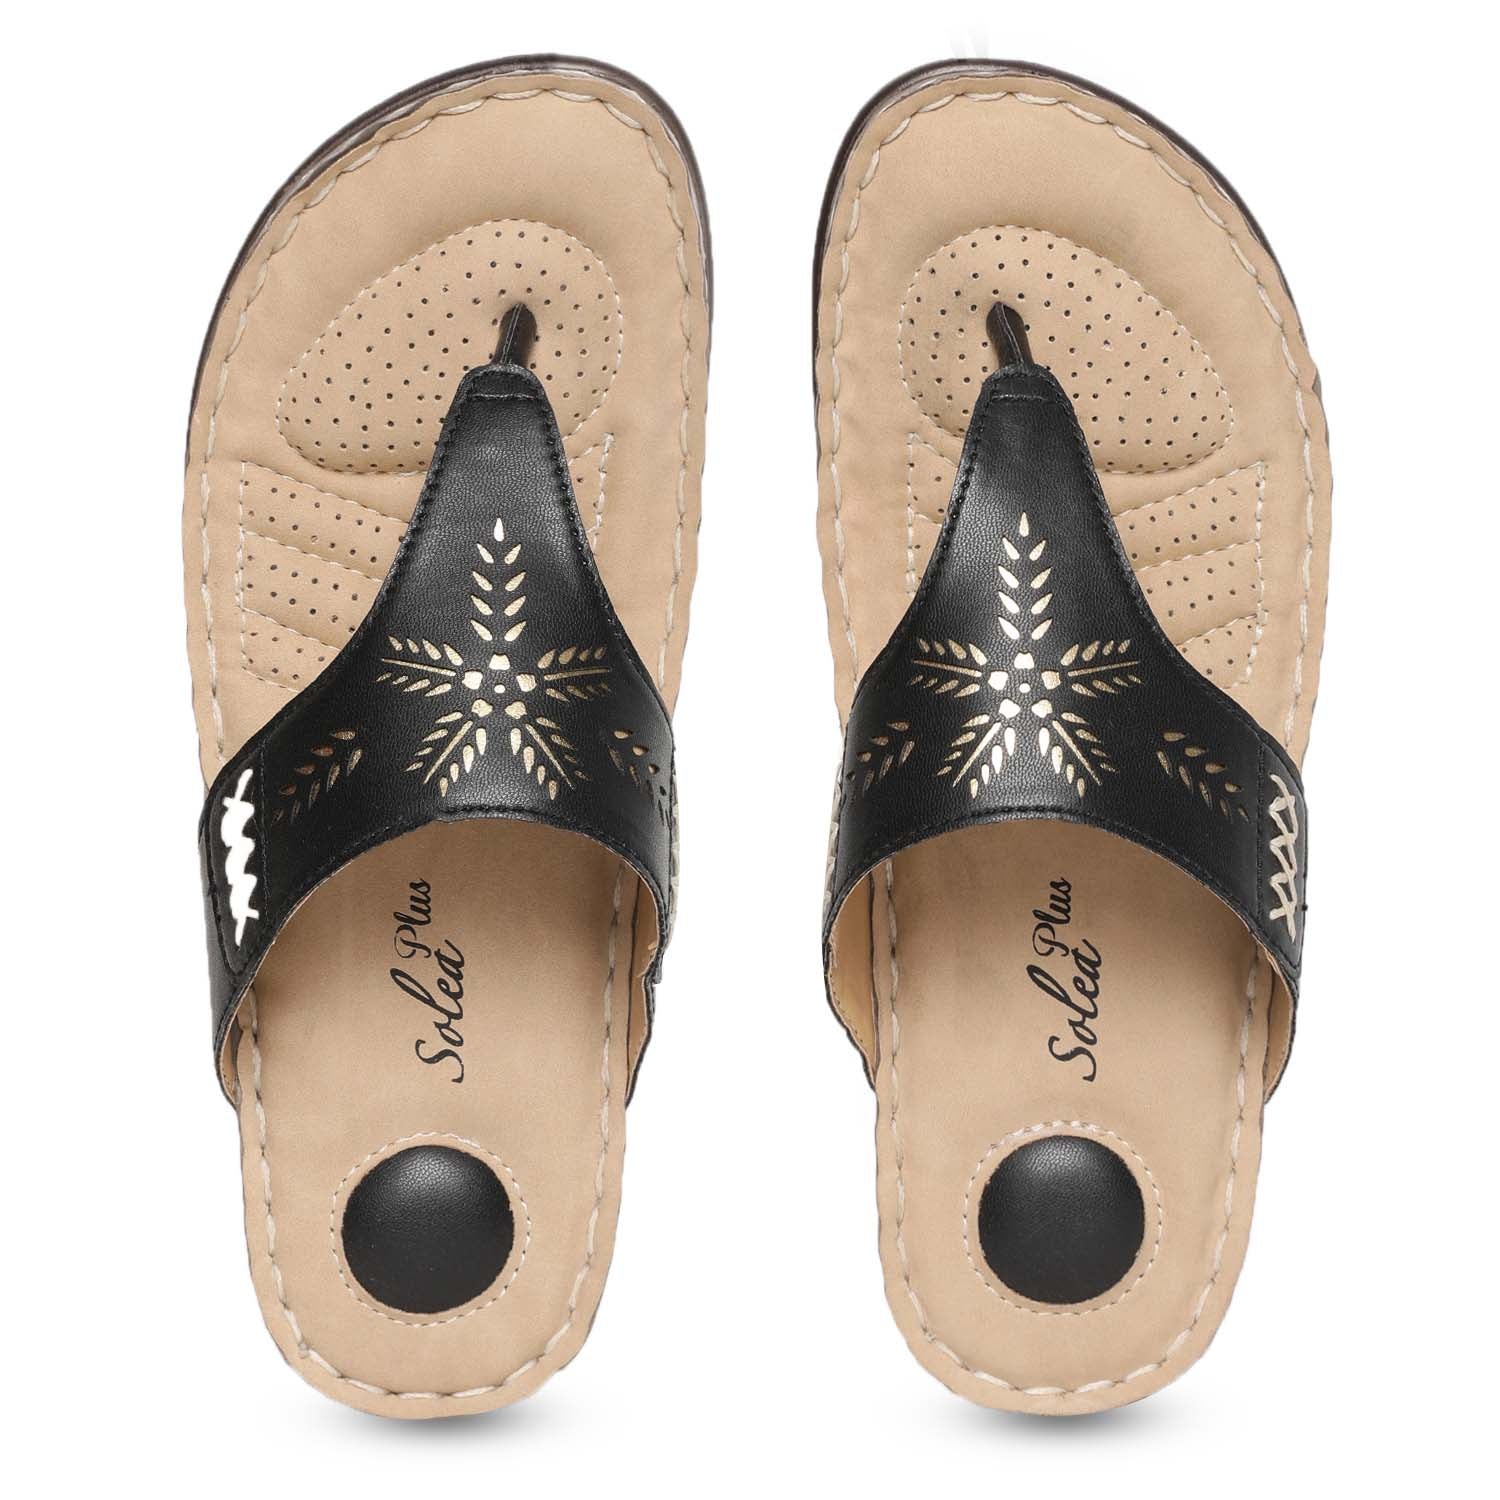 Paragon  R10524L Women Sandals | Casual &amp; Formal Sandals | Stylish, Comfortable &amp; Durable | For Daily &amp; Occasion Wear